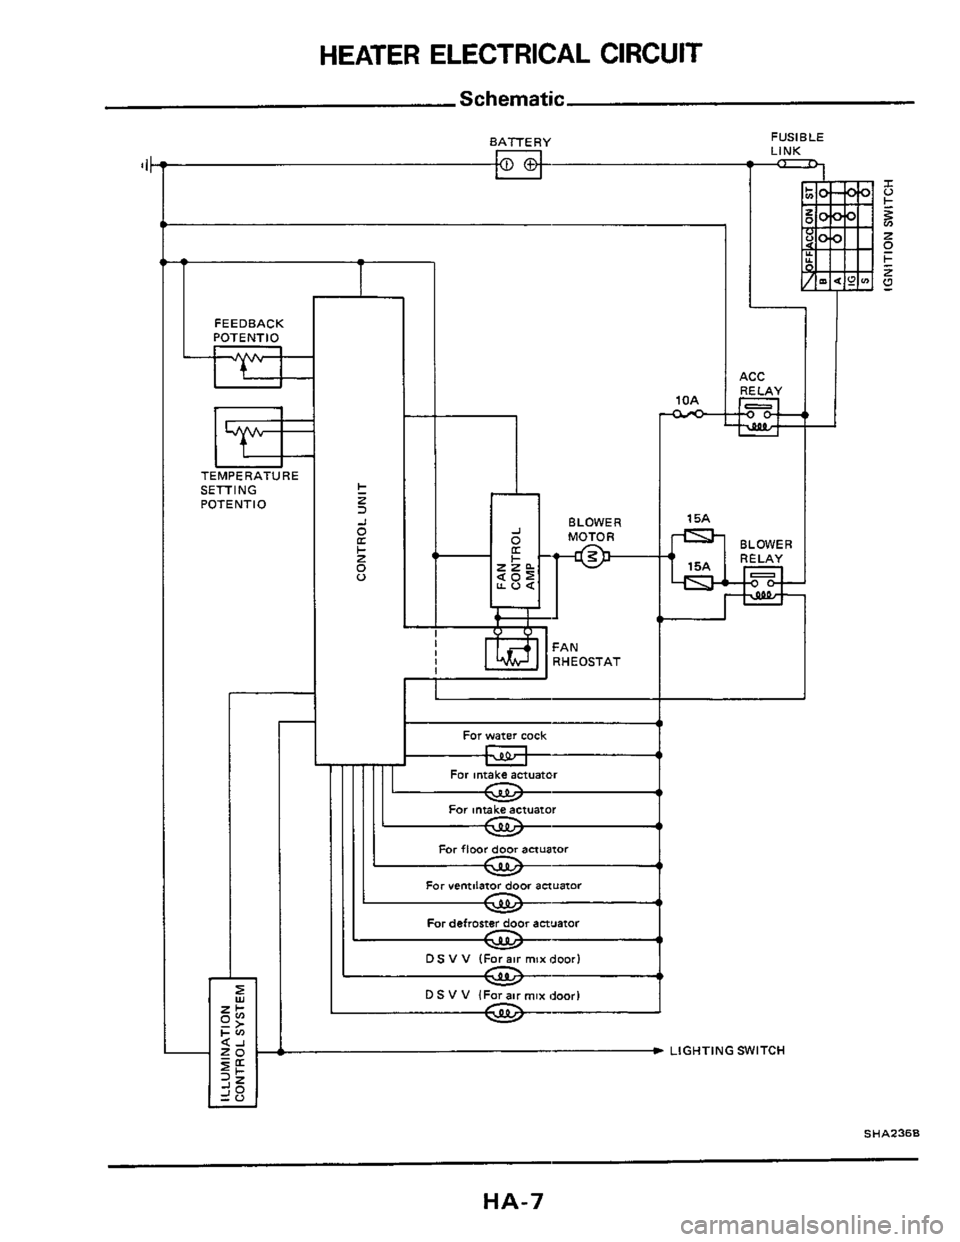 NISSAN 300ZX 1984 Z31 Heather And Air Conditioner Workshop Manual HEATER ELECTRICAL  CIRCUIT 
Schematic 
BATTERY 
FEEDBACK 
POTENT10 
TEMPERATURE 
SEmlNG  POTENT10 
I I 
For water cock 
FUSIBLE 
LINK 
1 
4 
BLOWER 
RELAY 
For intake actuator 
For floor door actuator